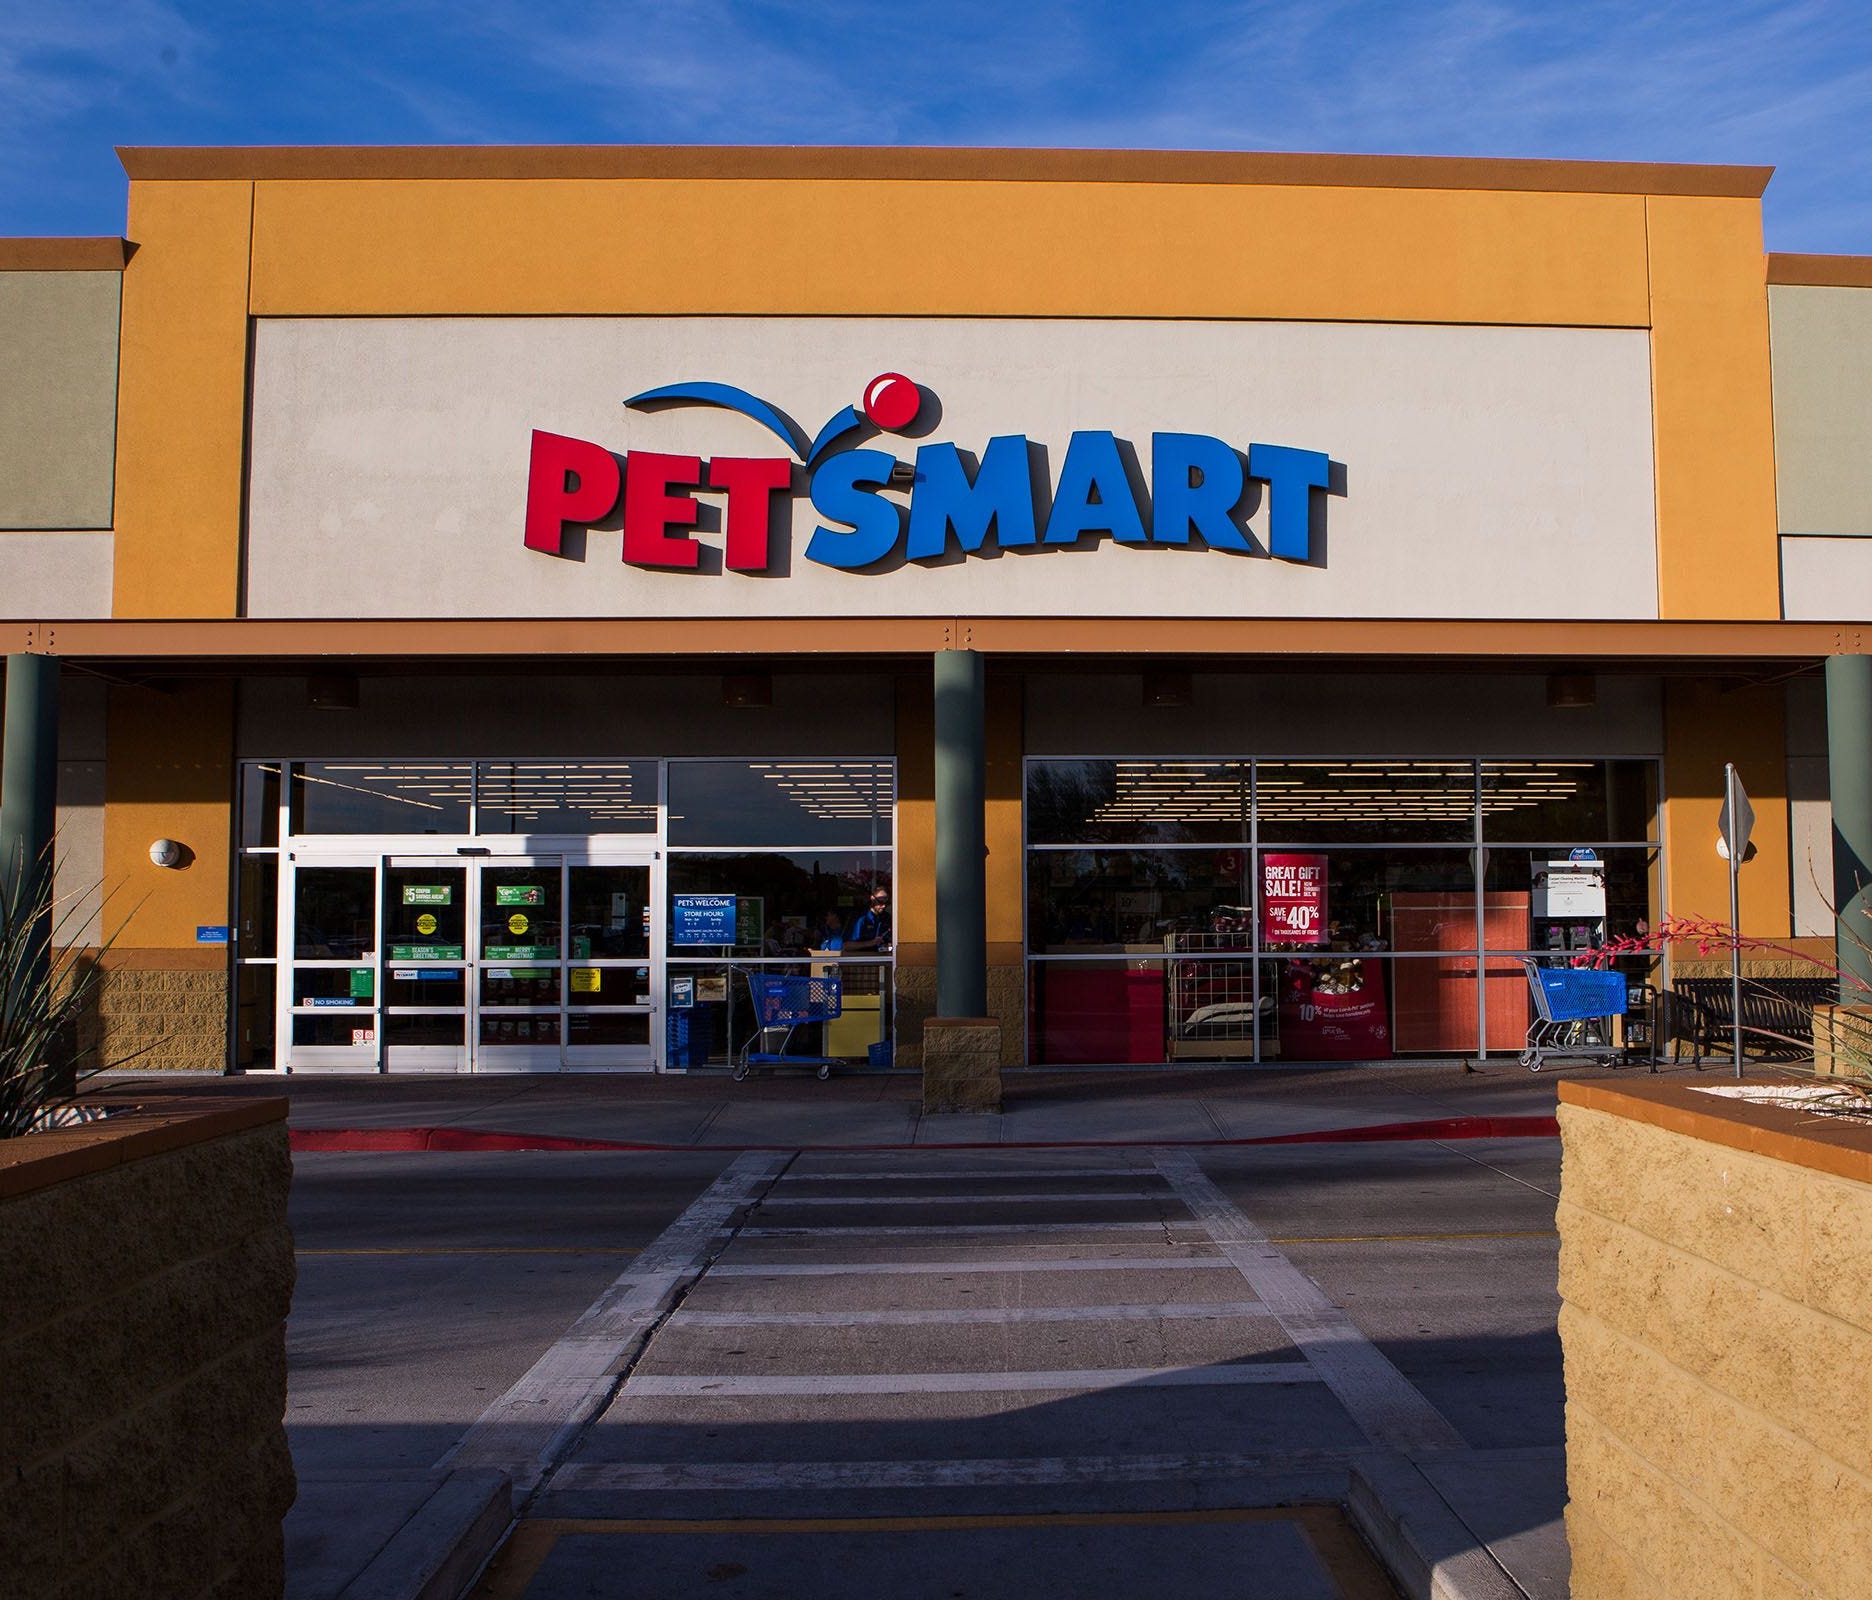 PetSmart said its staff followed appropriated procedures following the death of an 8-year-old bulldog.